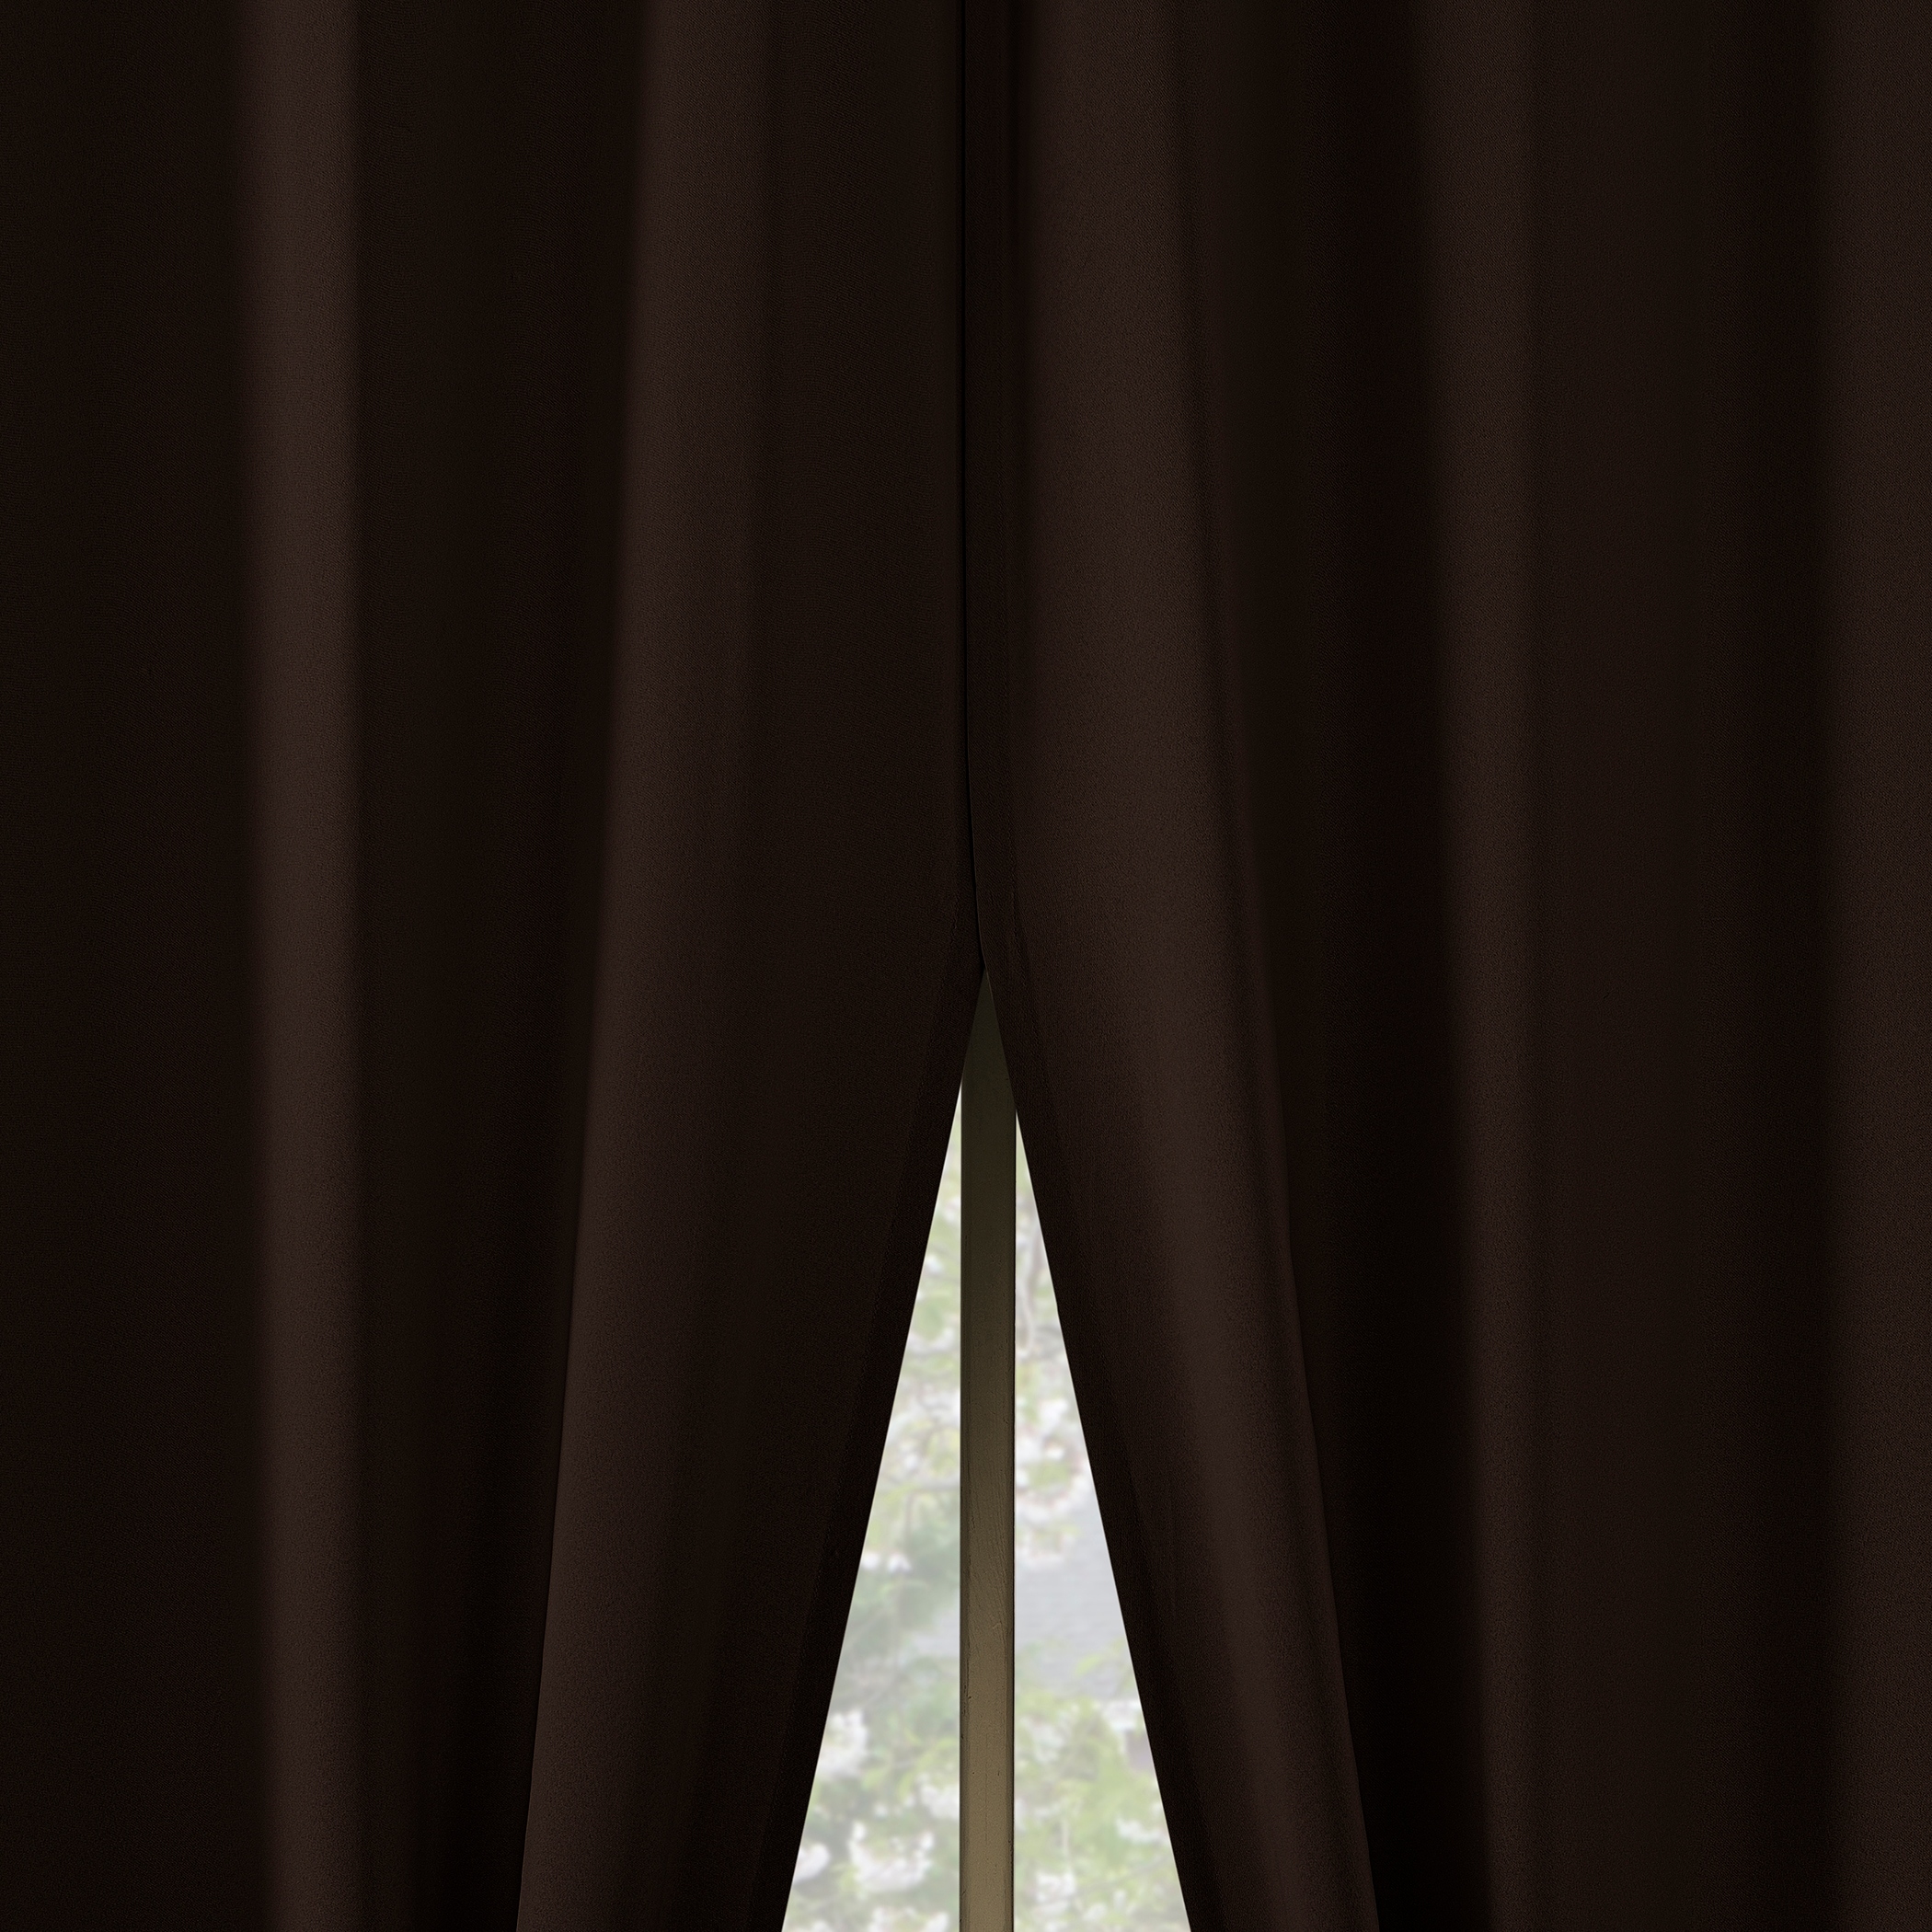 No. 918 Brandon Magnetic Closure Gray Polyester 54 in. W x 84 in. L Grommet Room Darkening Curtain (Double Panel)